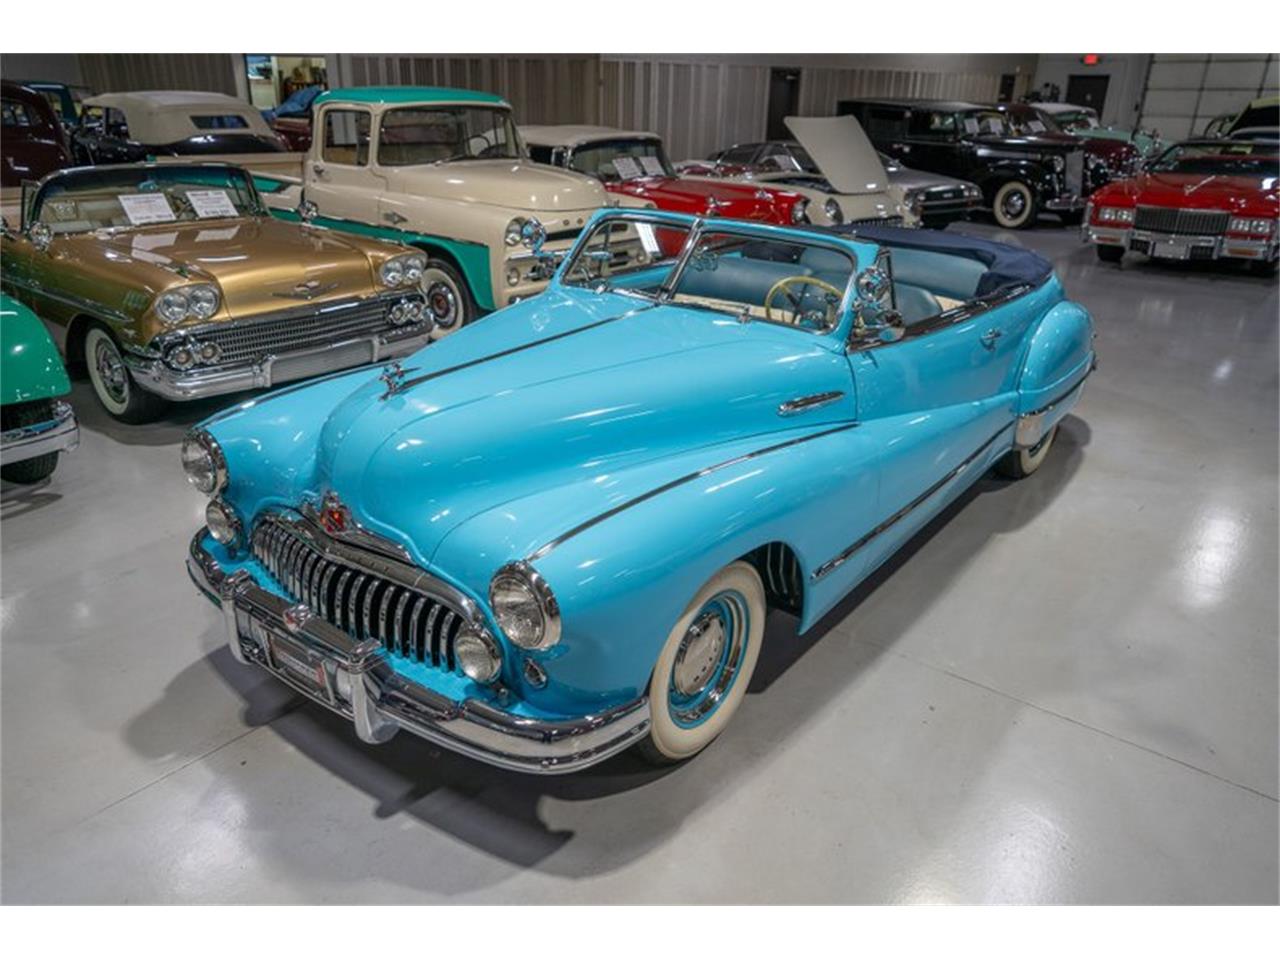 For Sale: 1947 Buick Super in Rogers, Minnesota for sale in Rogers, MN